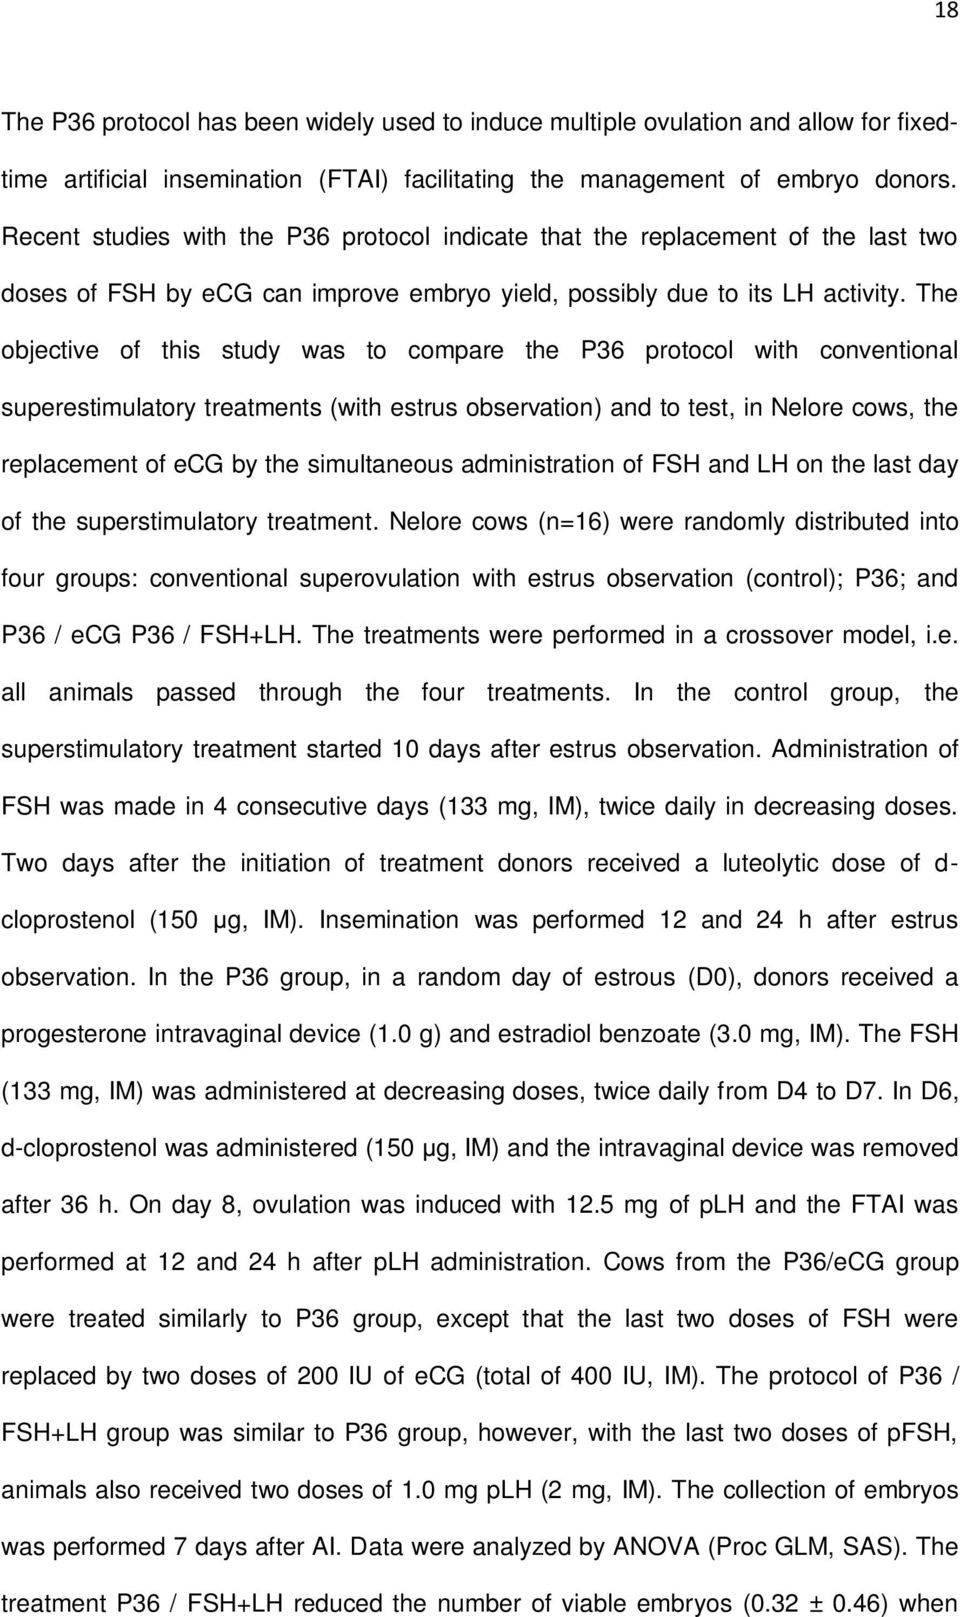 The objective of this study was to compare the P36 protocol with conventional superestimulatory treatments (with estrus observation) and to test, in Nelore cows, the replacement of ecg by the